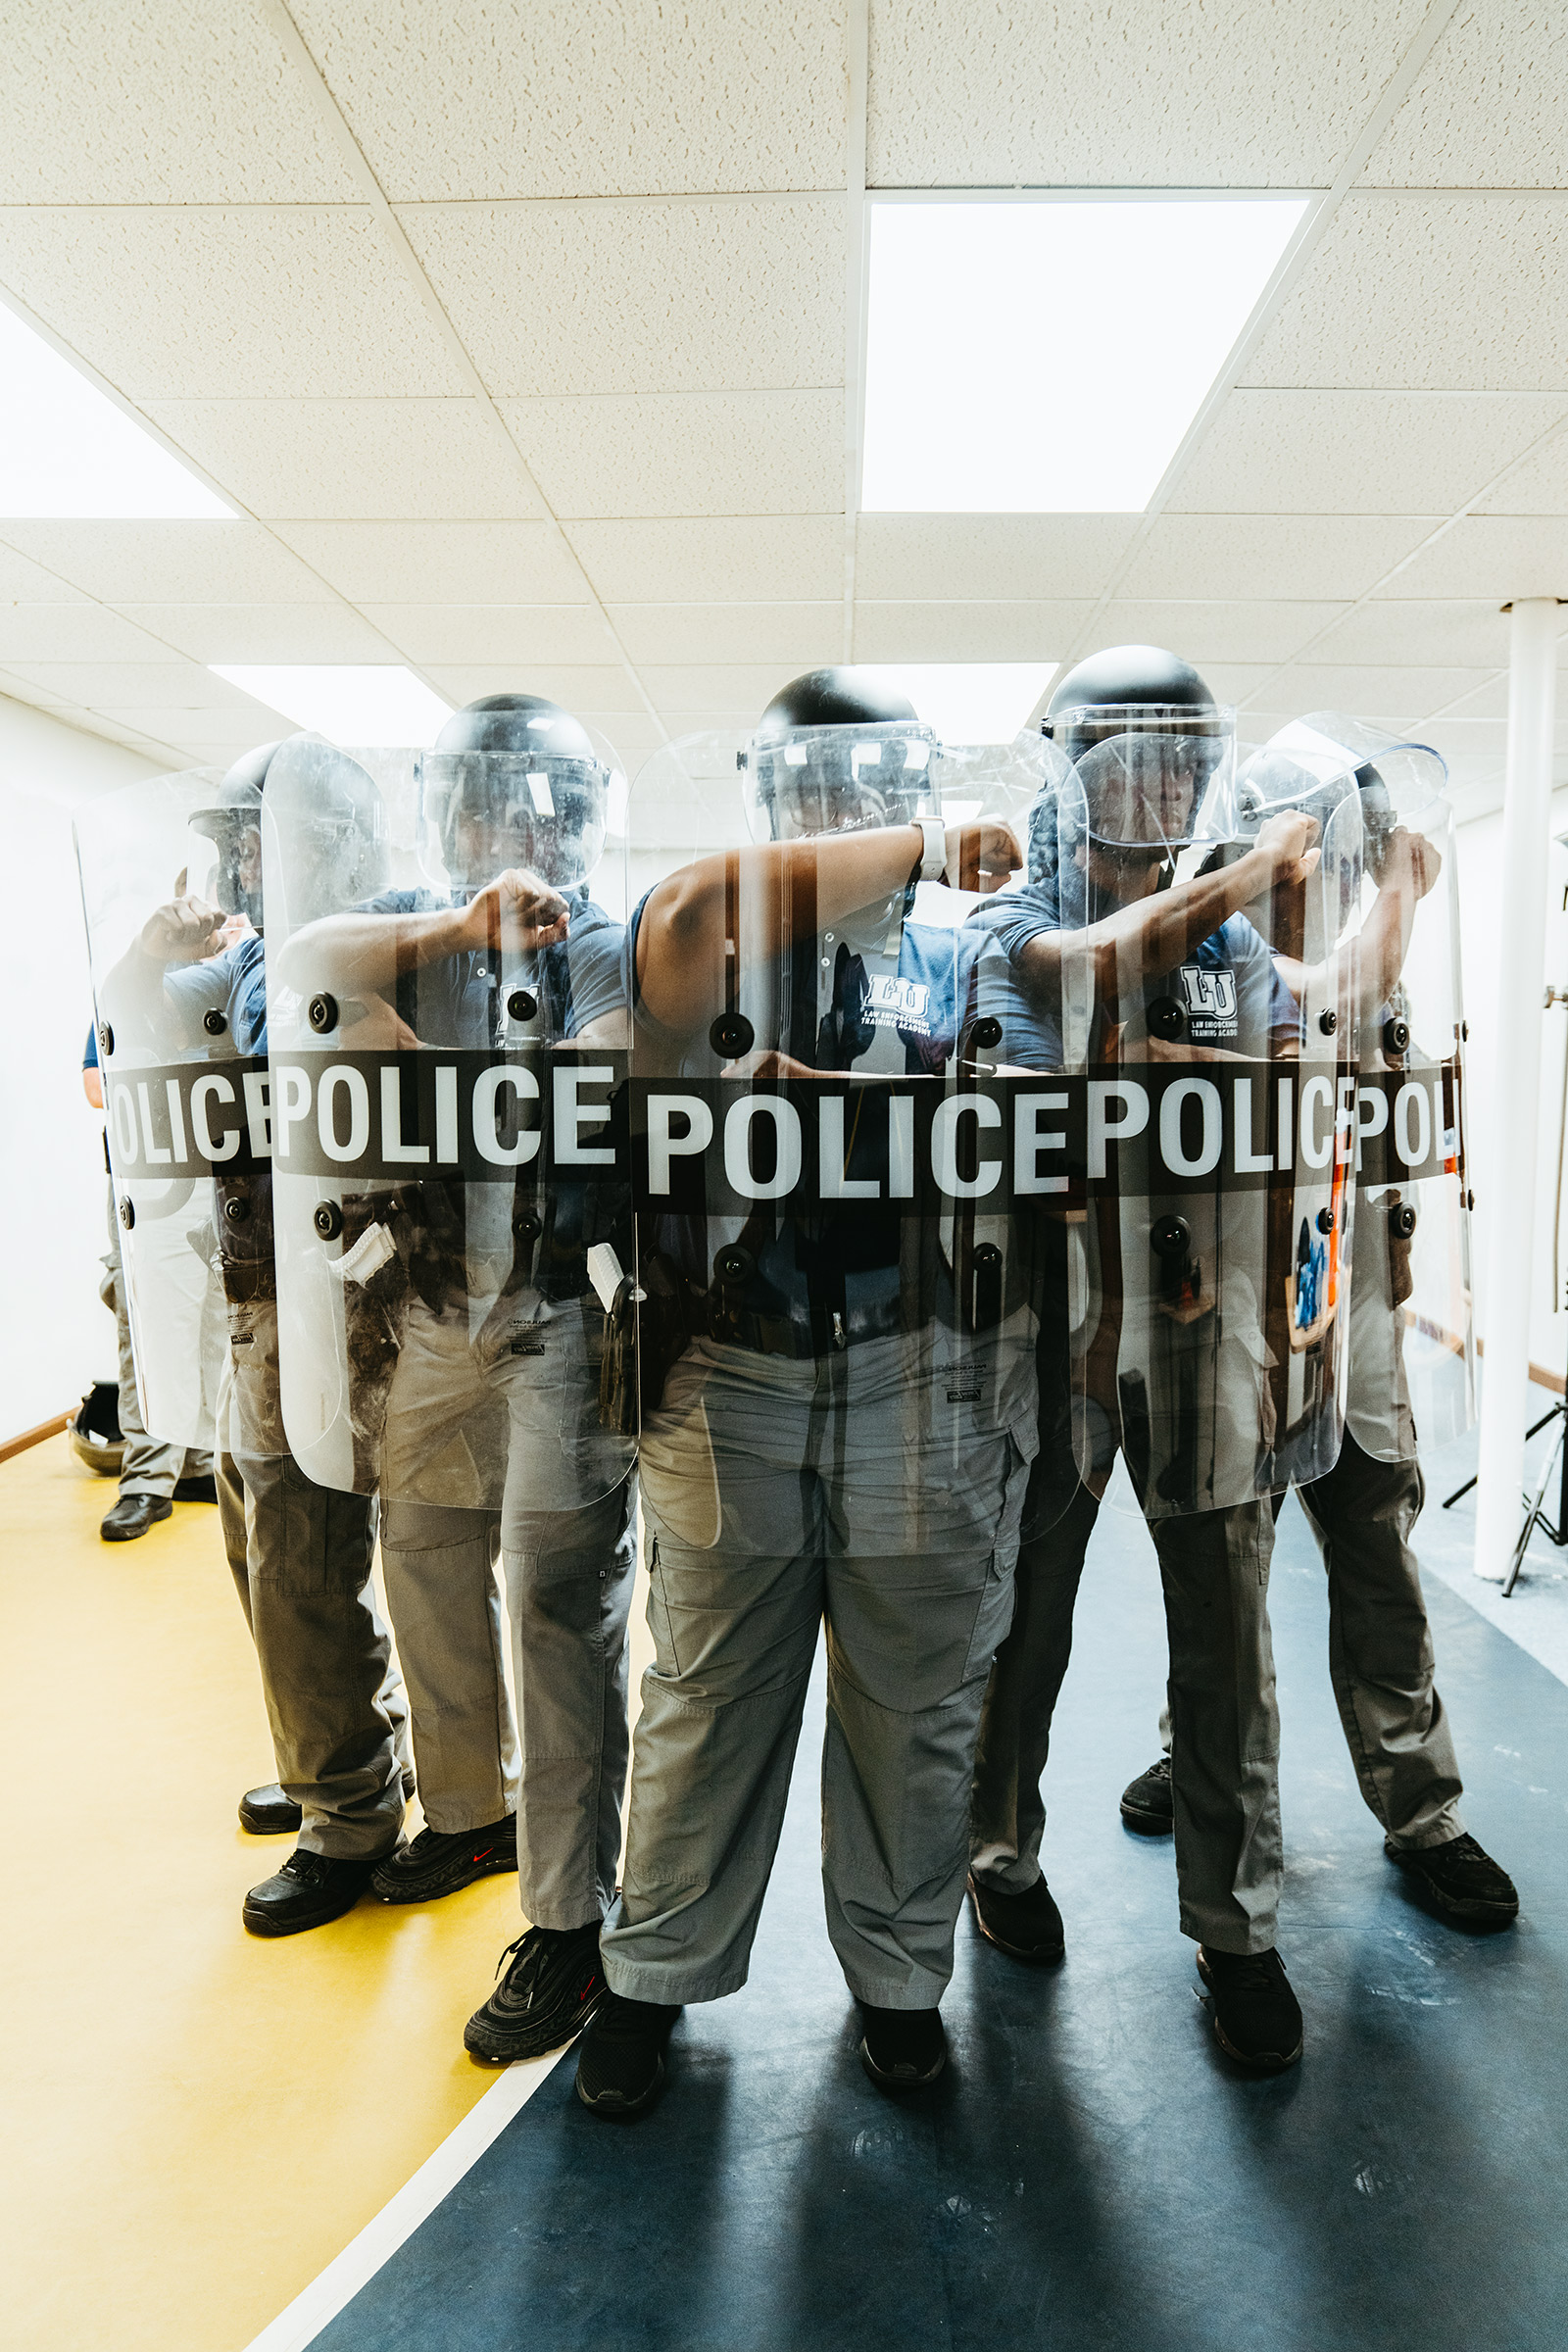 Students in <a href="https://time.com/5952208/hbcu-black-police-academy/">tactical training</a> at the Lincoln University Police Academy in Jefferson City, Mo., on March 12. (Joe Martinez for TIME)